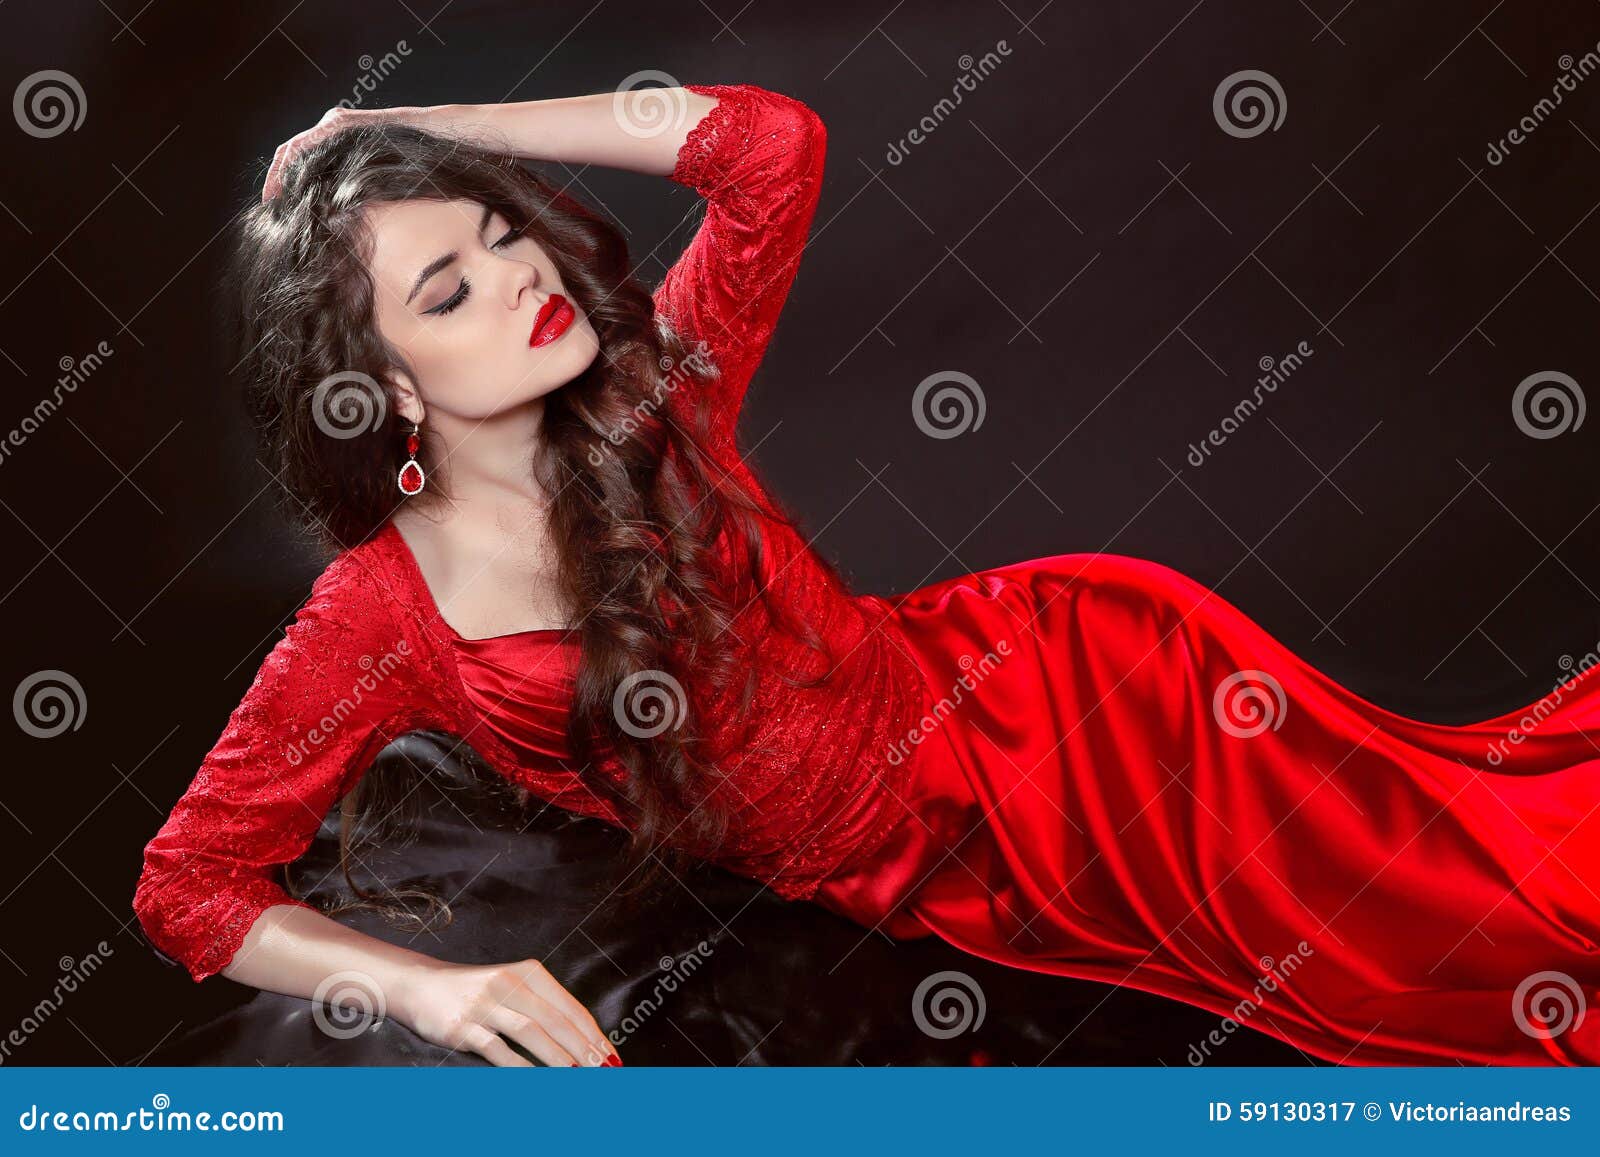 udobnost, izazov - Page 16 Woman-red-lying-dark-fashion-tempting-girl-model-s-sexy-gown-sensual-lips-long-hair-isolated-black-59130317